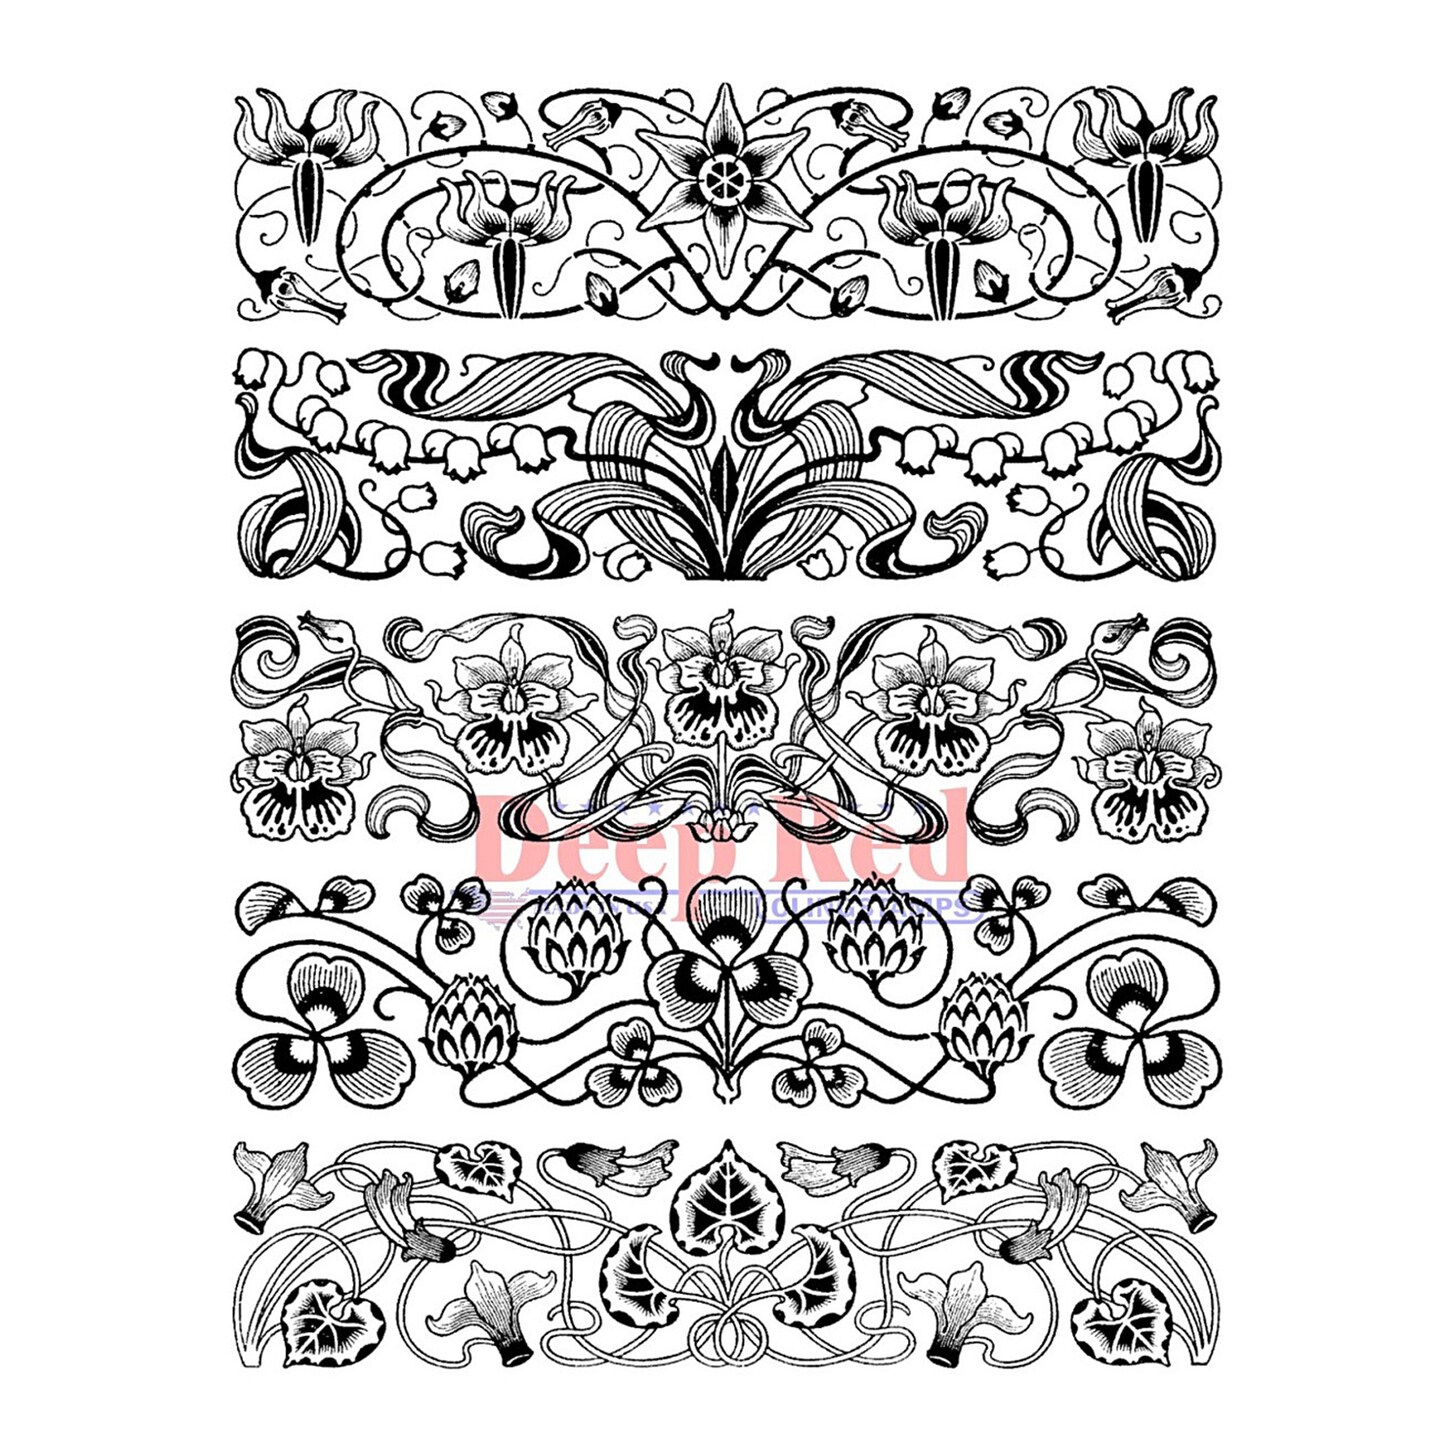 Deep Red Stamps Art Deco Borders Rubber Cling Stamp Set 4 x 6 inches